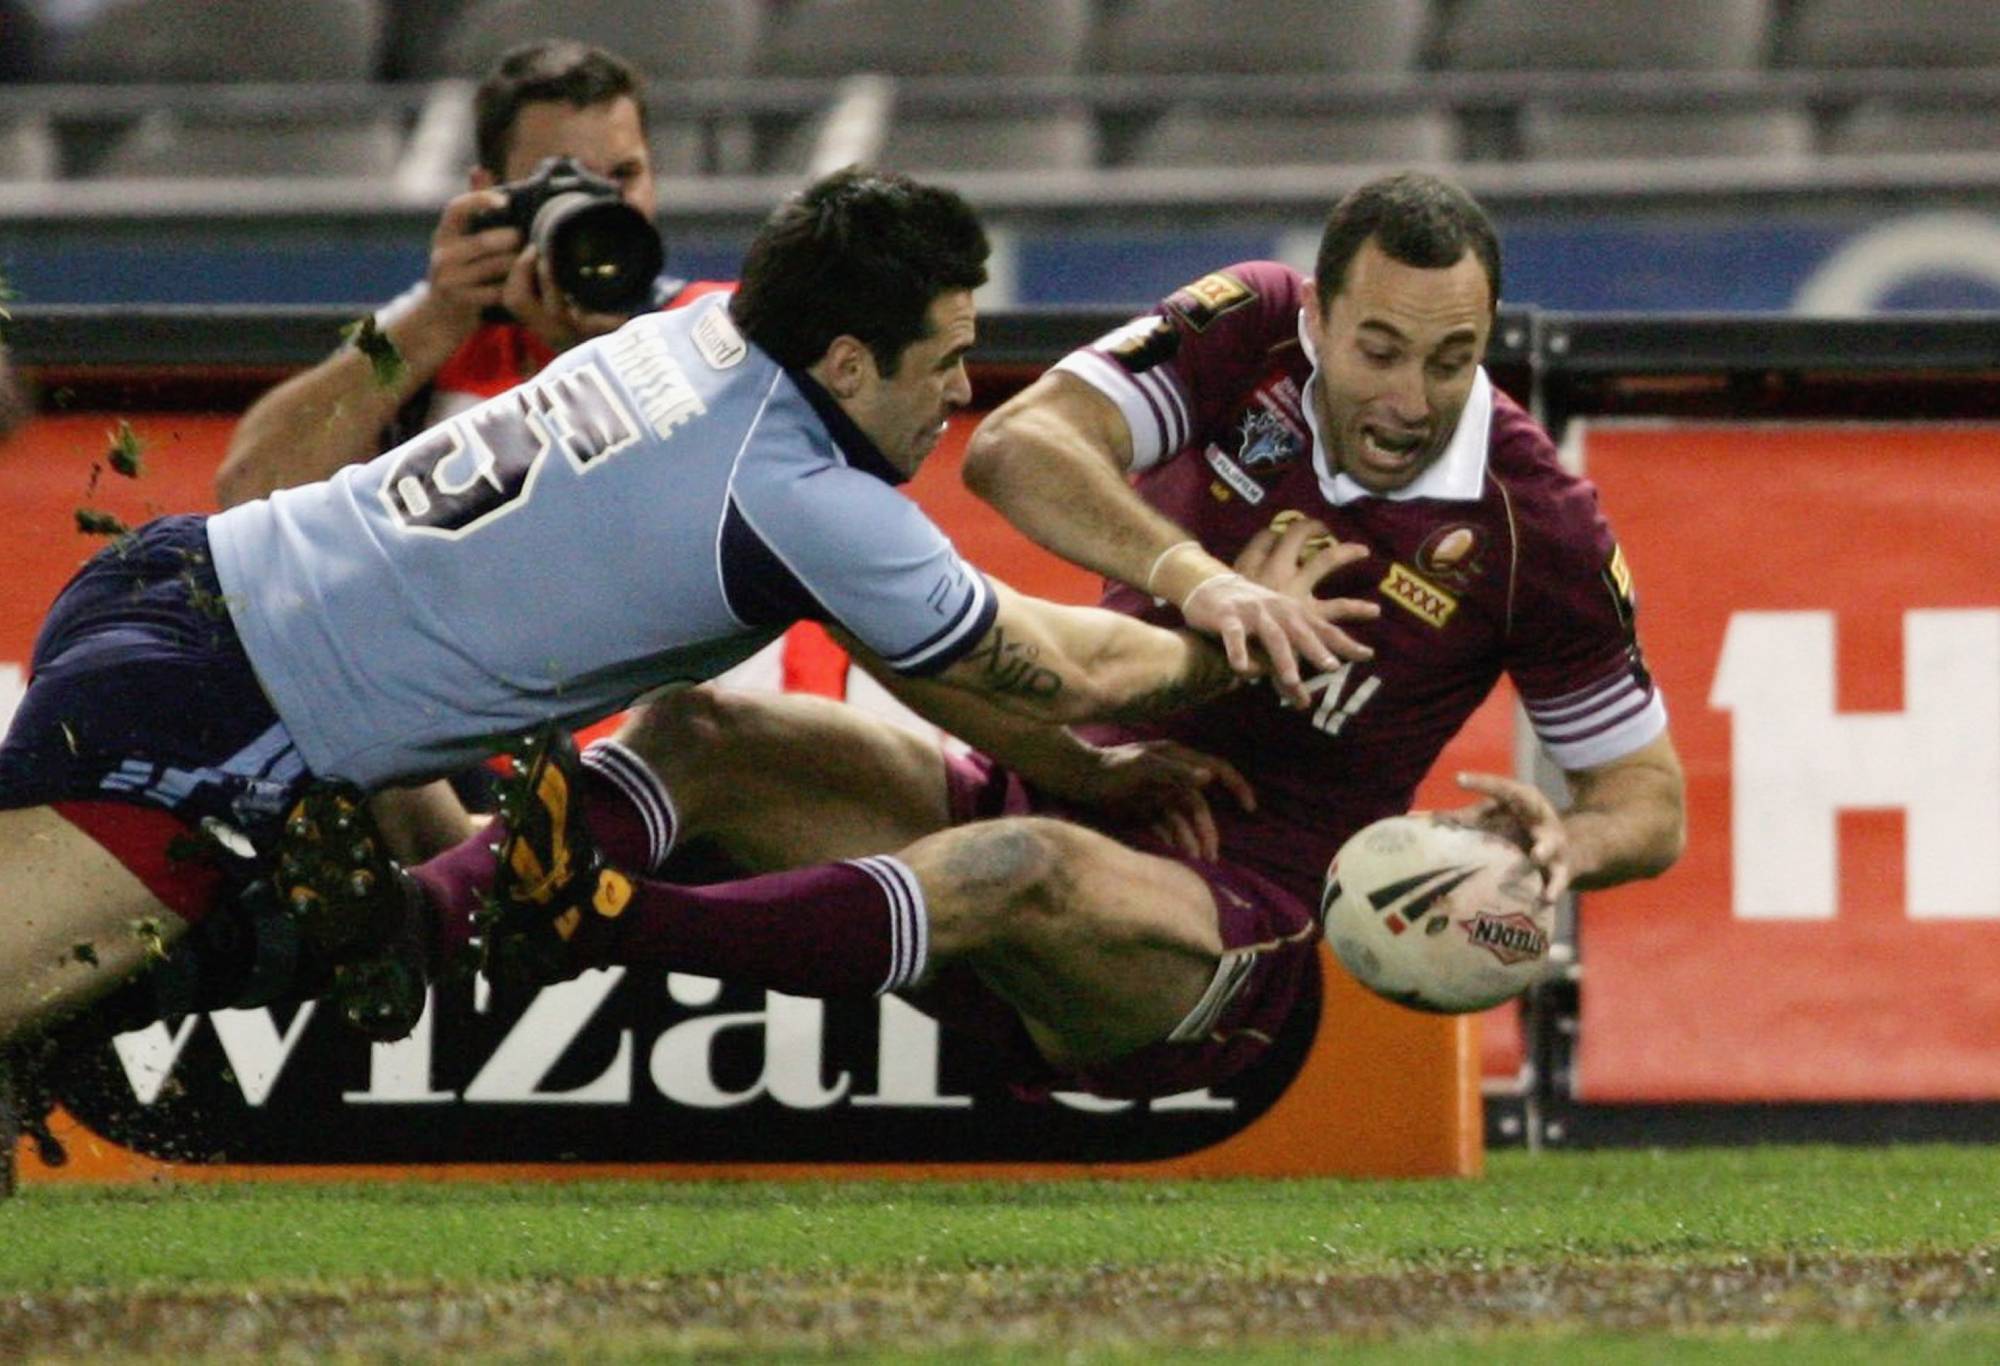 MELBOURNE, AUSTRALIA - JULY 05: Adam Mogg of Queensland scores a try during the match between the New South Wales Blues and Queensland Maroons in the NRL State of Origin Game 3 at the Telstra Dome, July 5, 2006 in Melbourne, Australia.  (Photo by Adam Pretty/Getty Images)